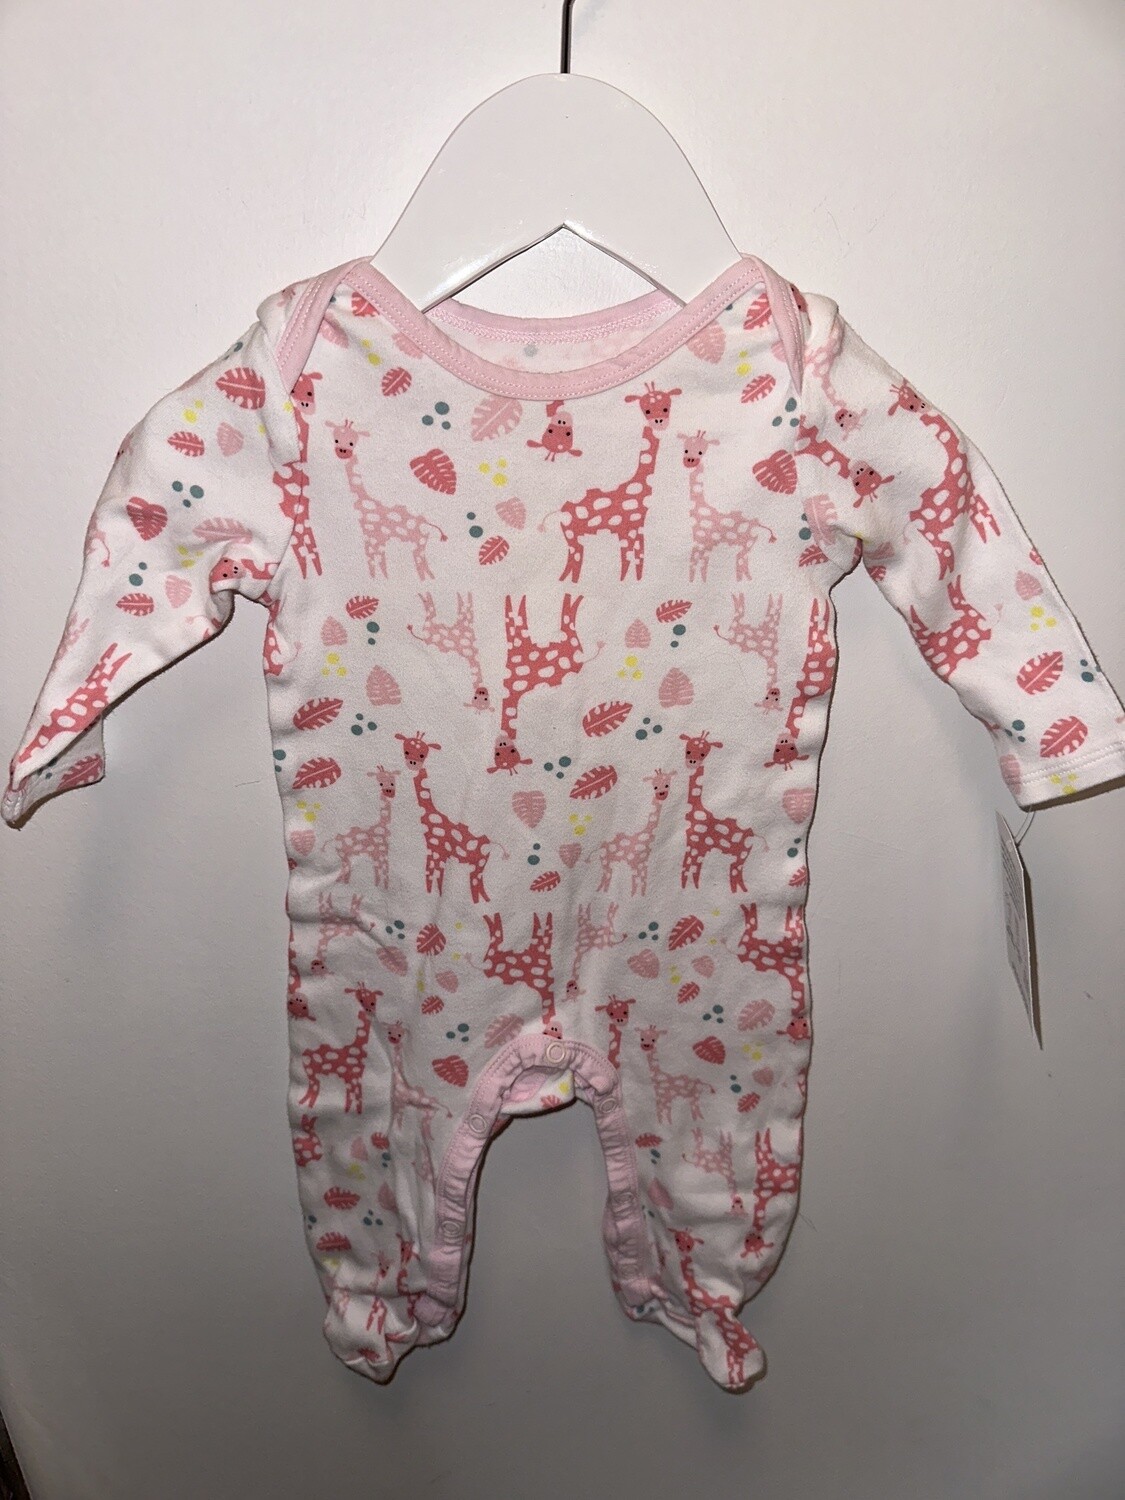 Used - TicTacToe - Long Sleeve - 3-6 Months - PWE616